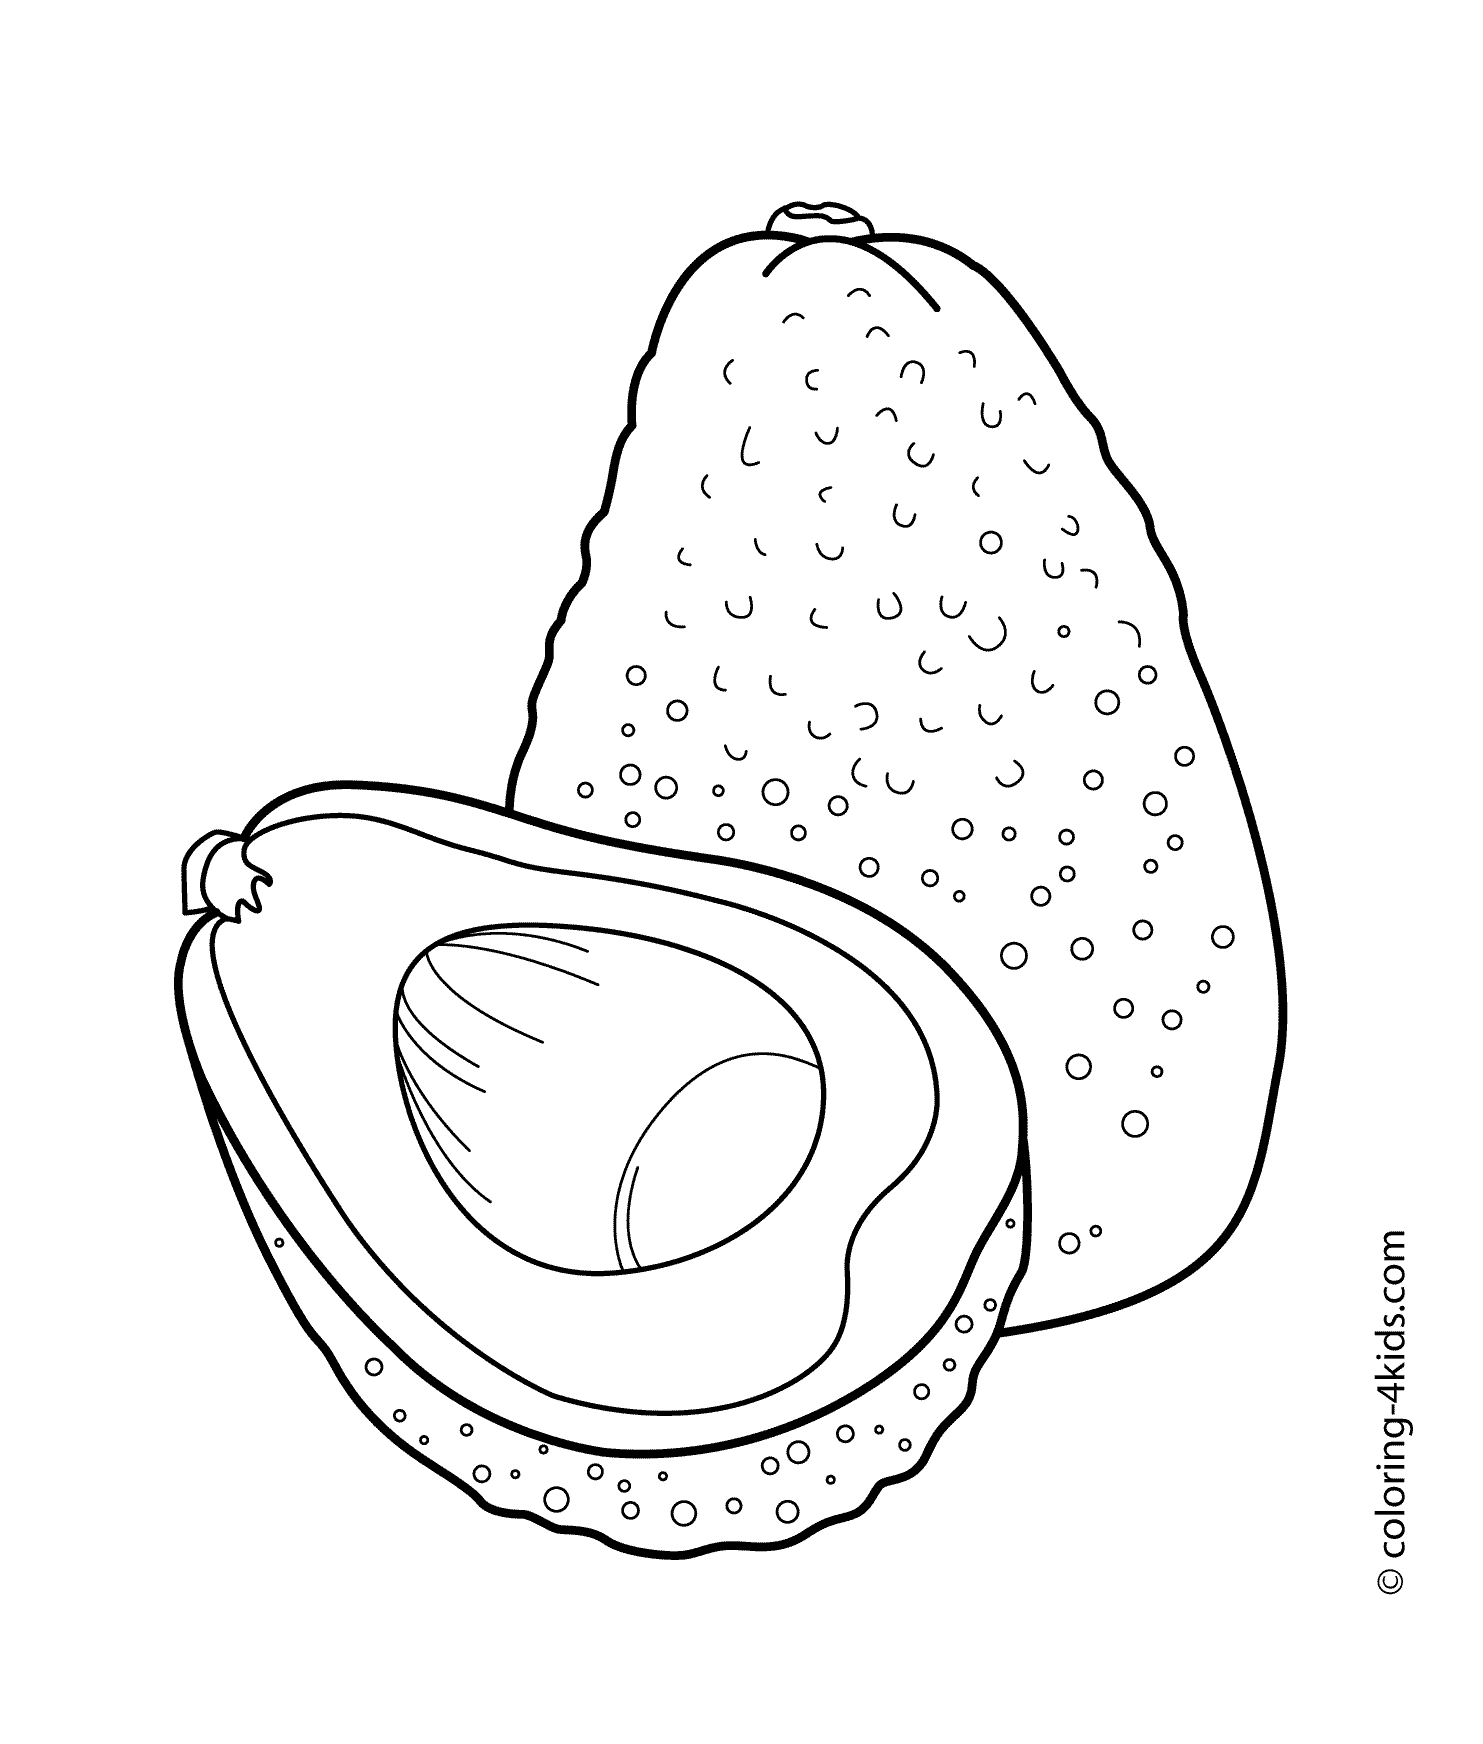 Avocados fruits coloring pages. Avocado clipart line drawing